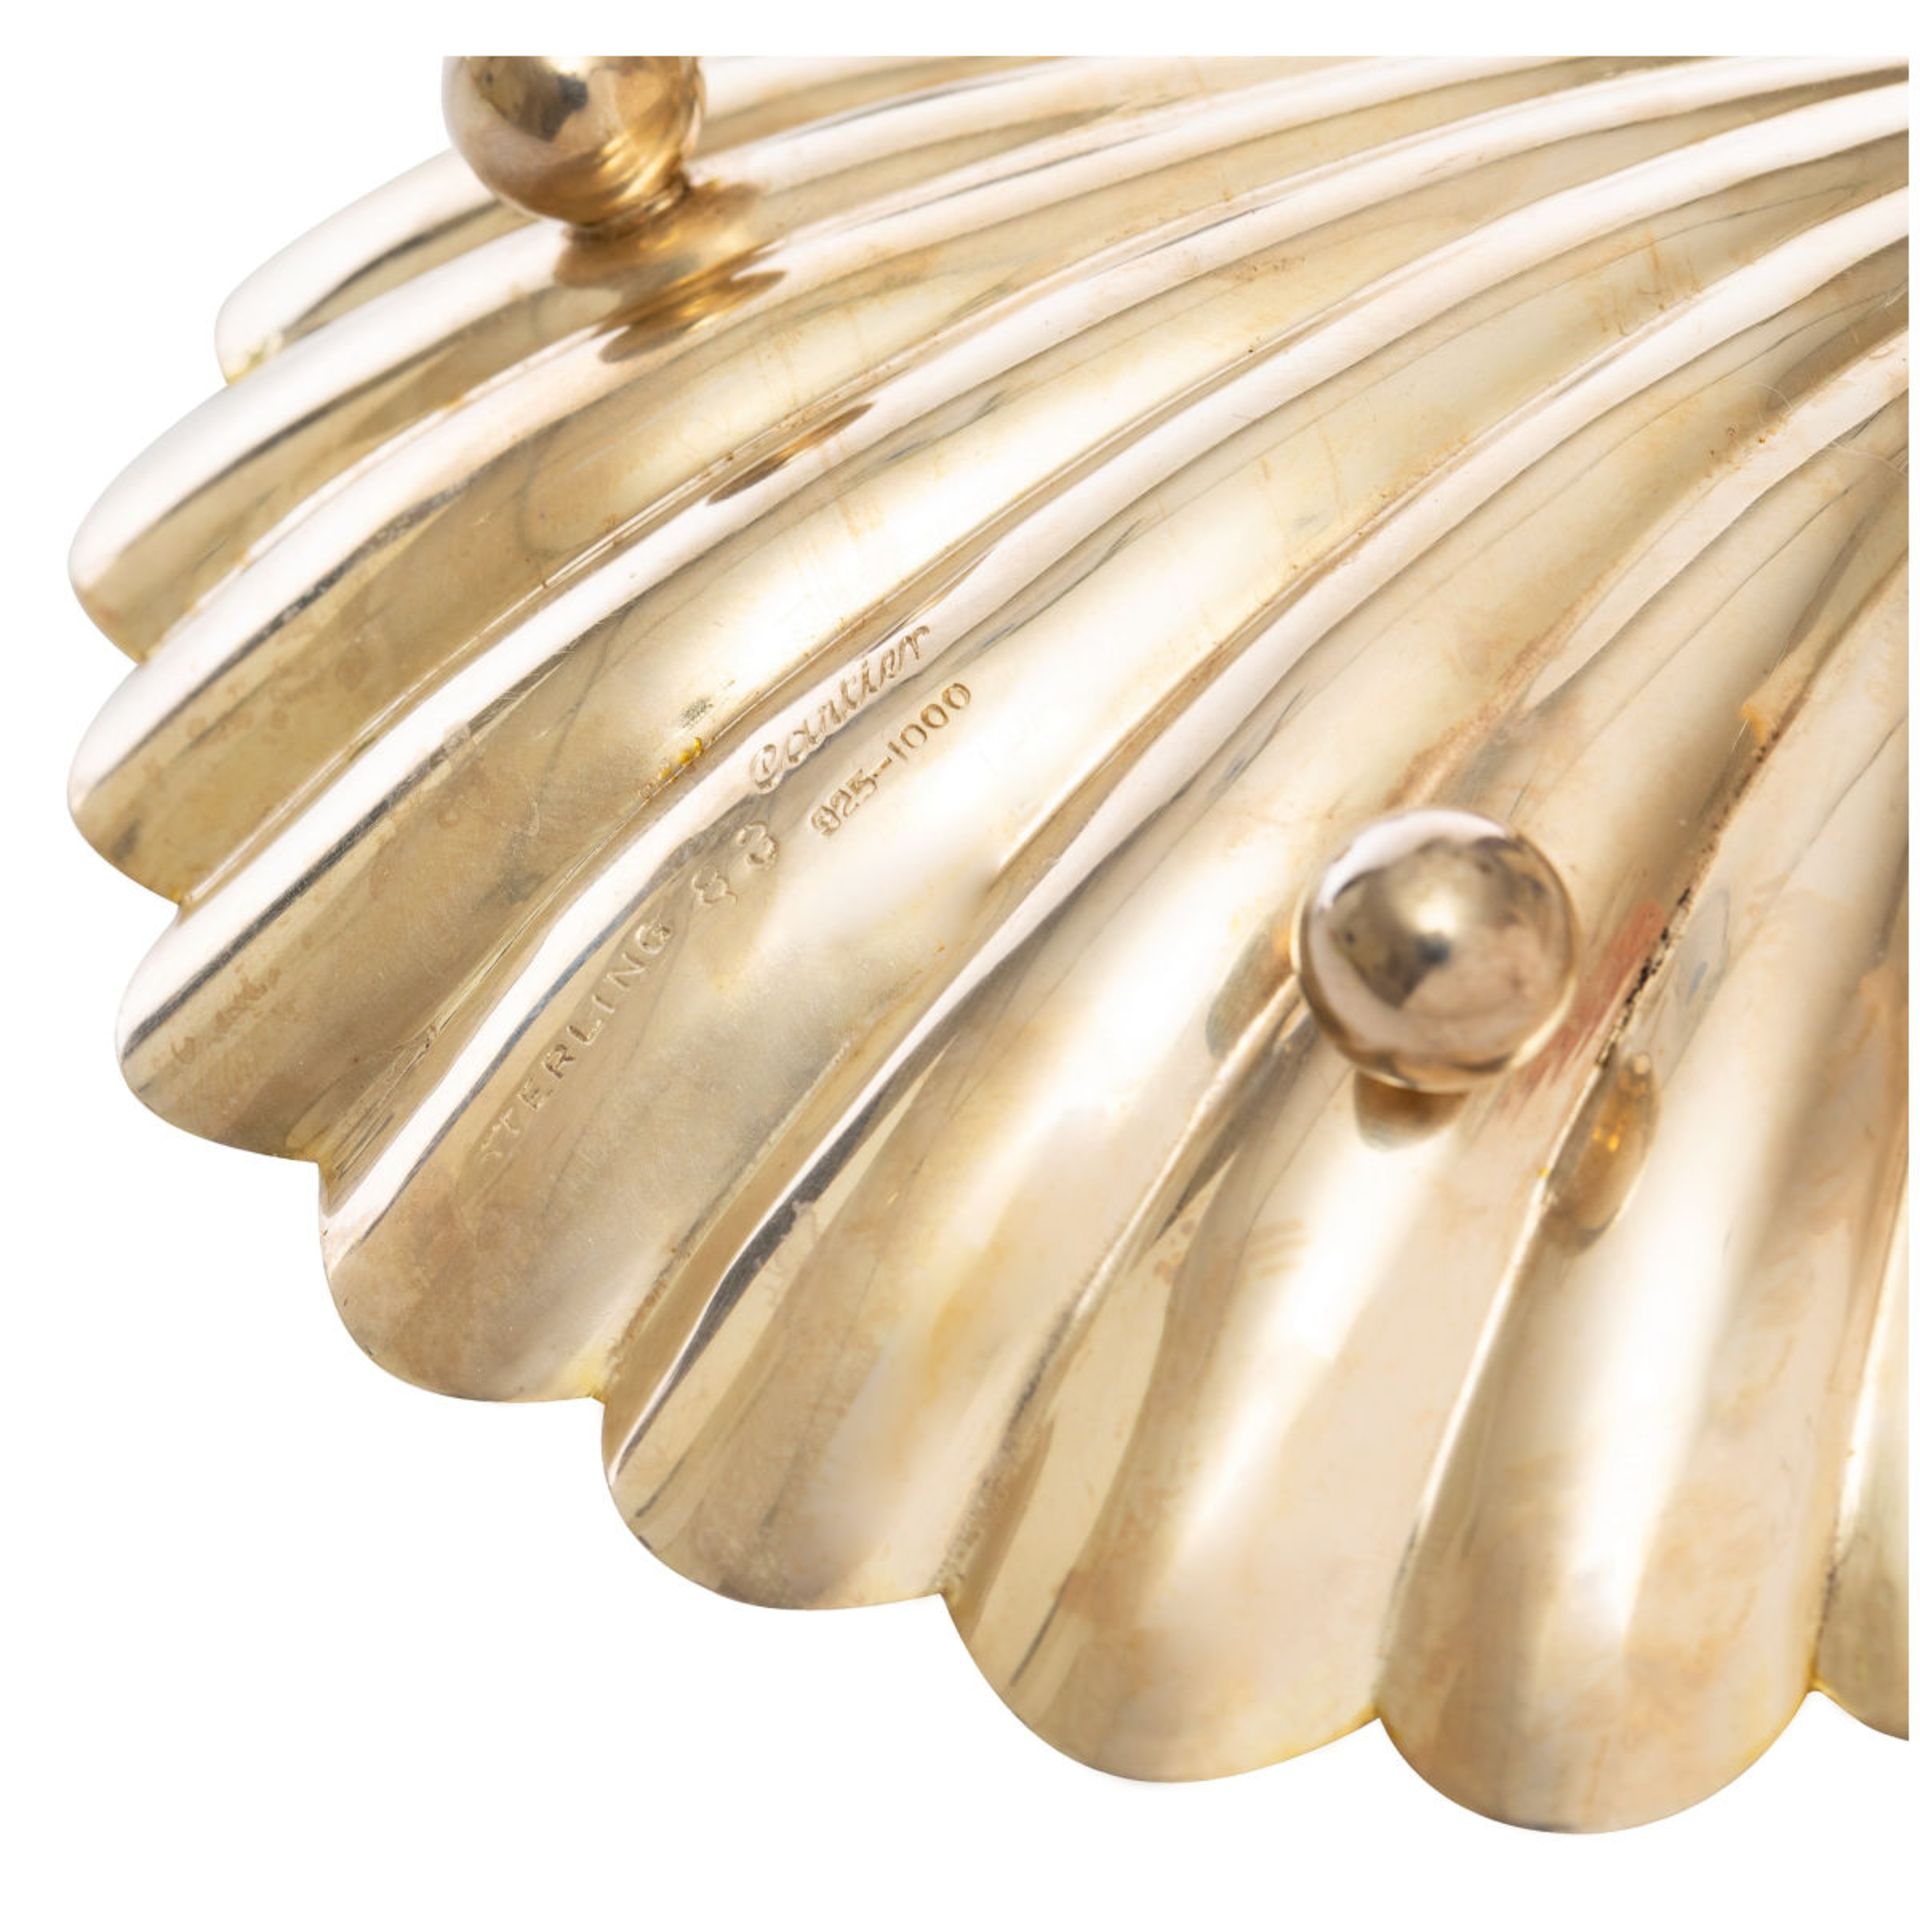 Cartier set of six shell dishes - Image 5 of 6